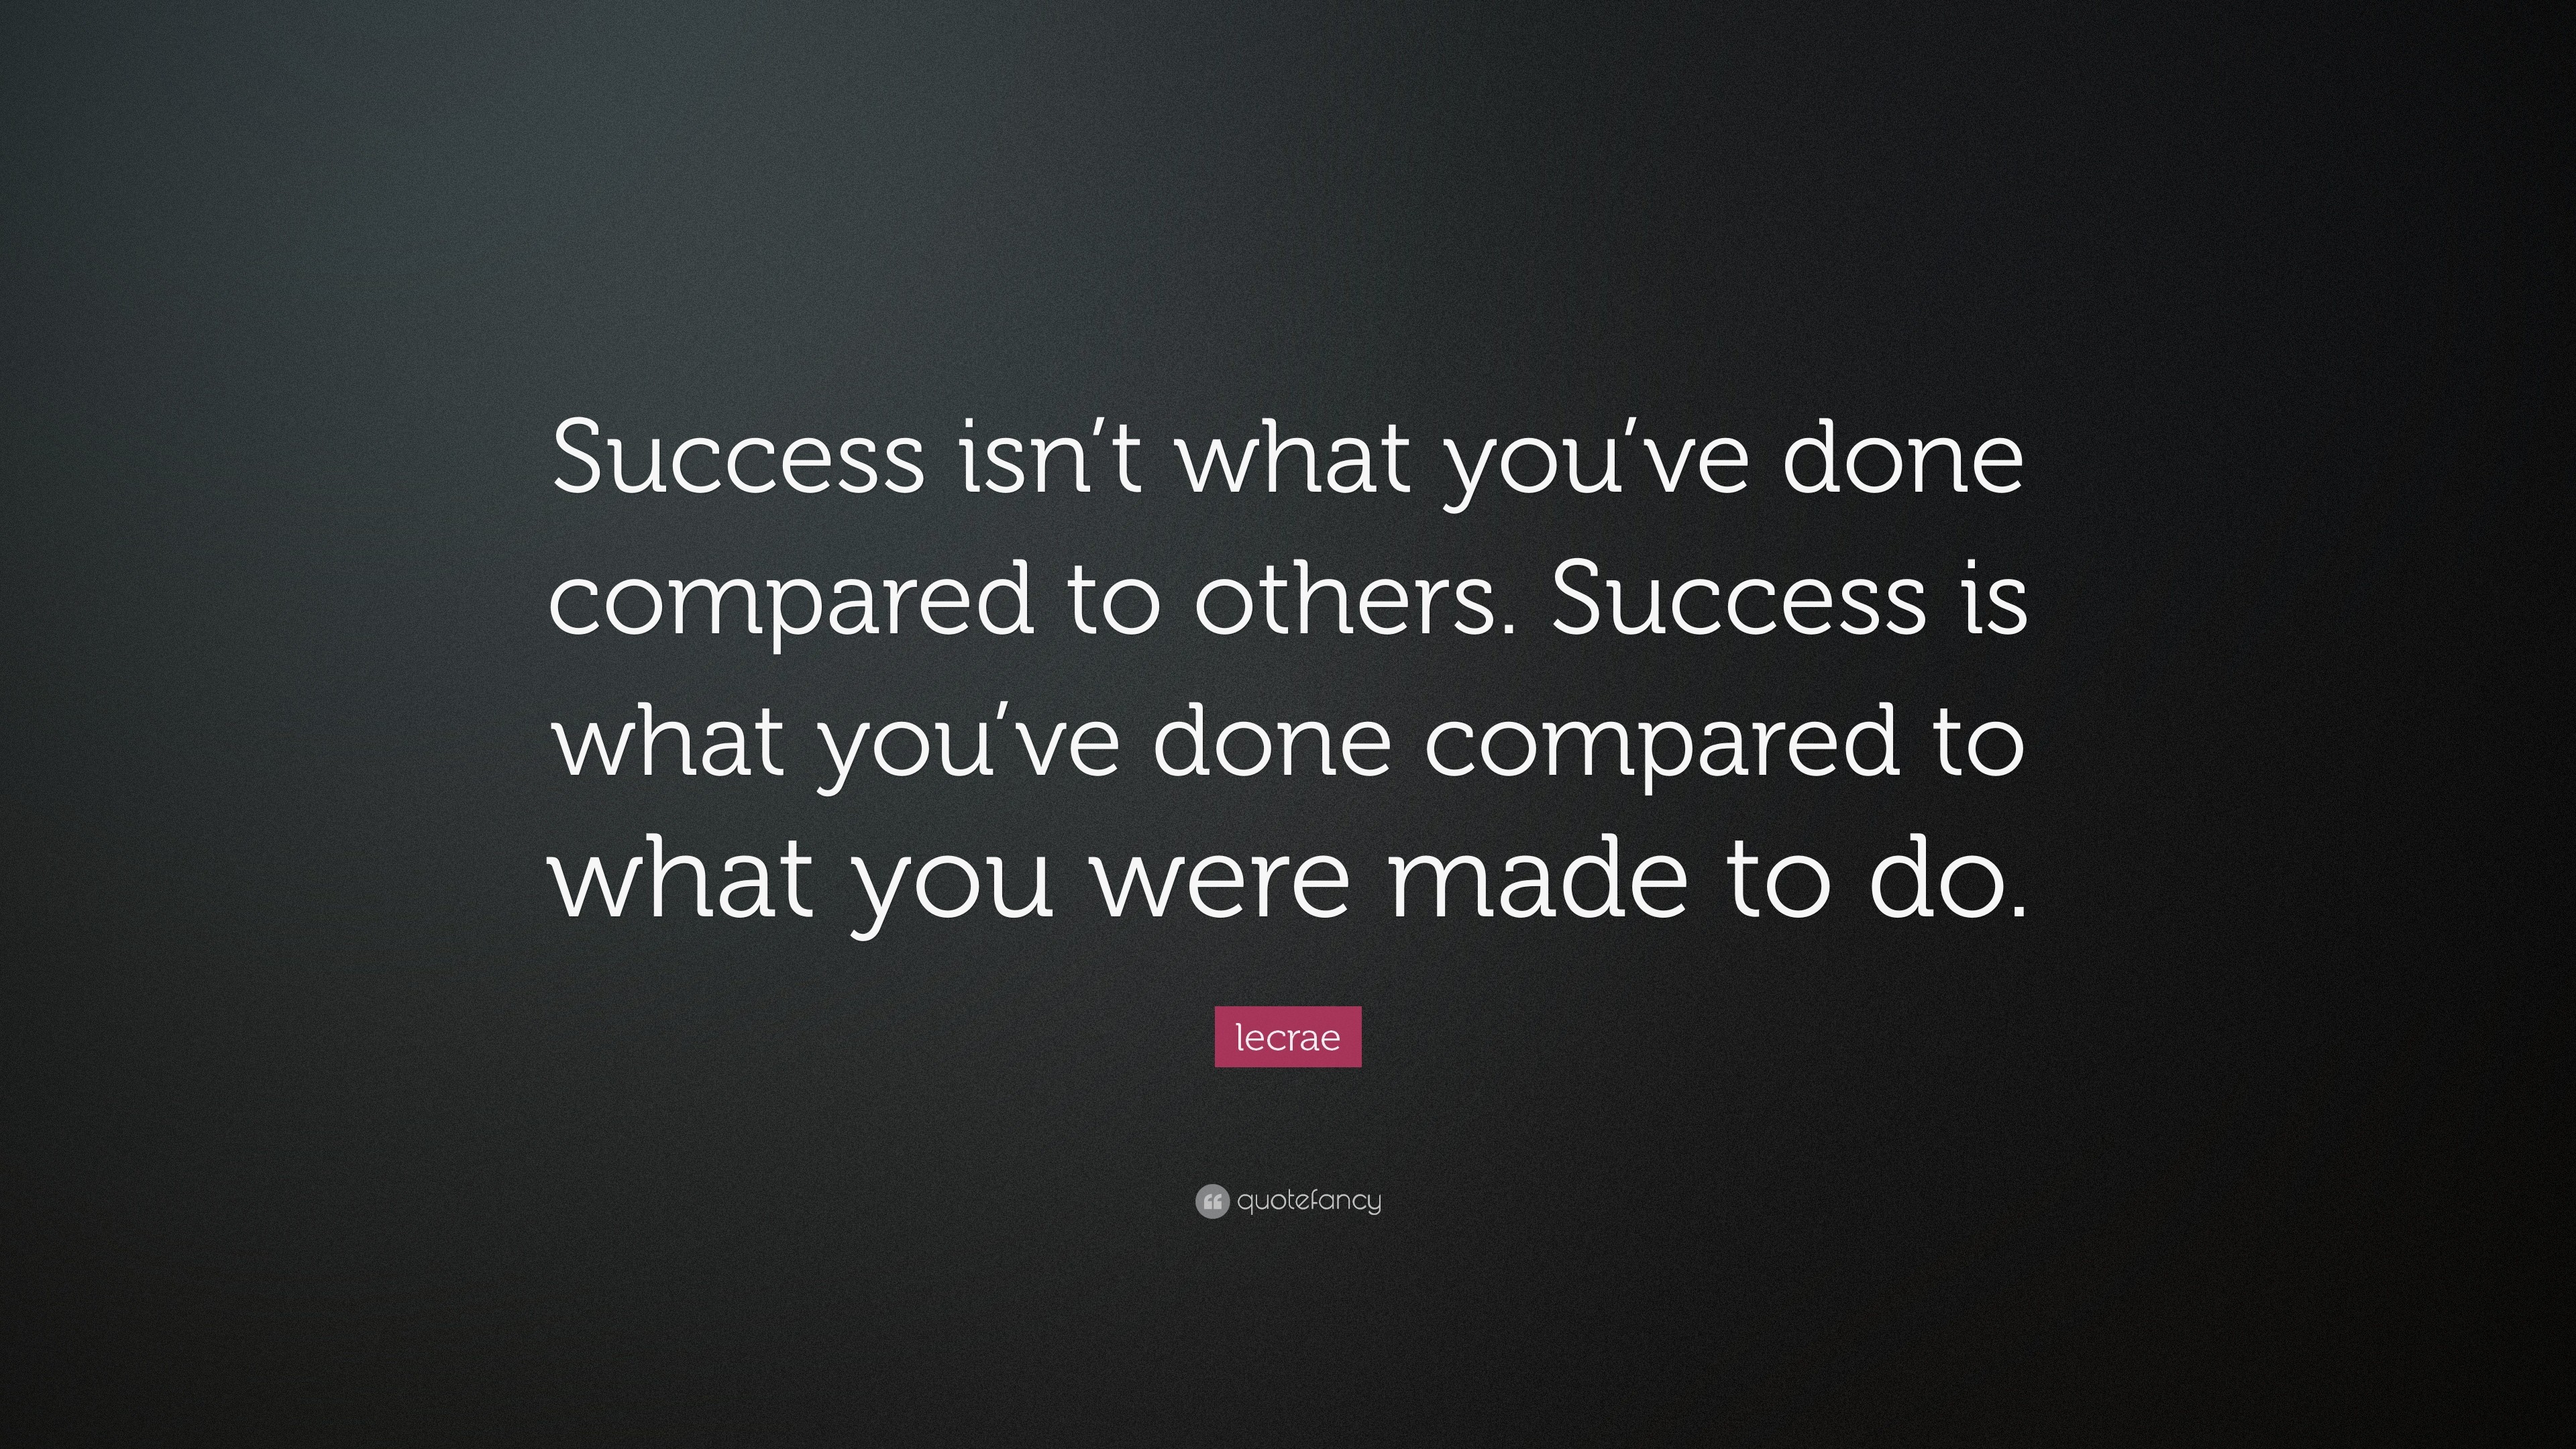 3840x2160 Lecrae Quote: “Success isn't what you've done compared to others